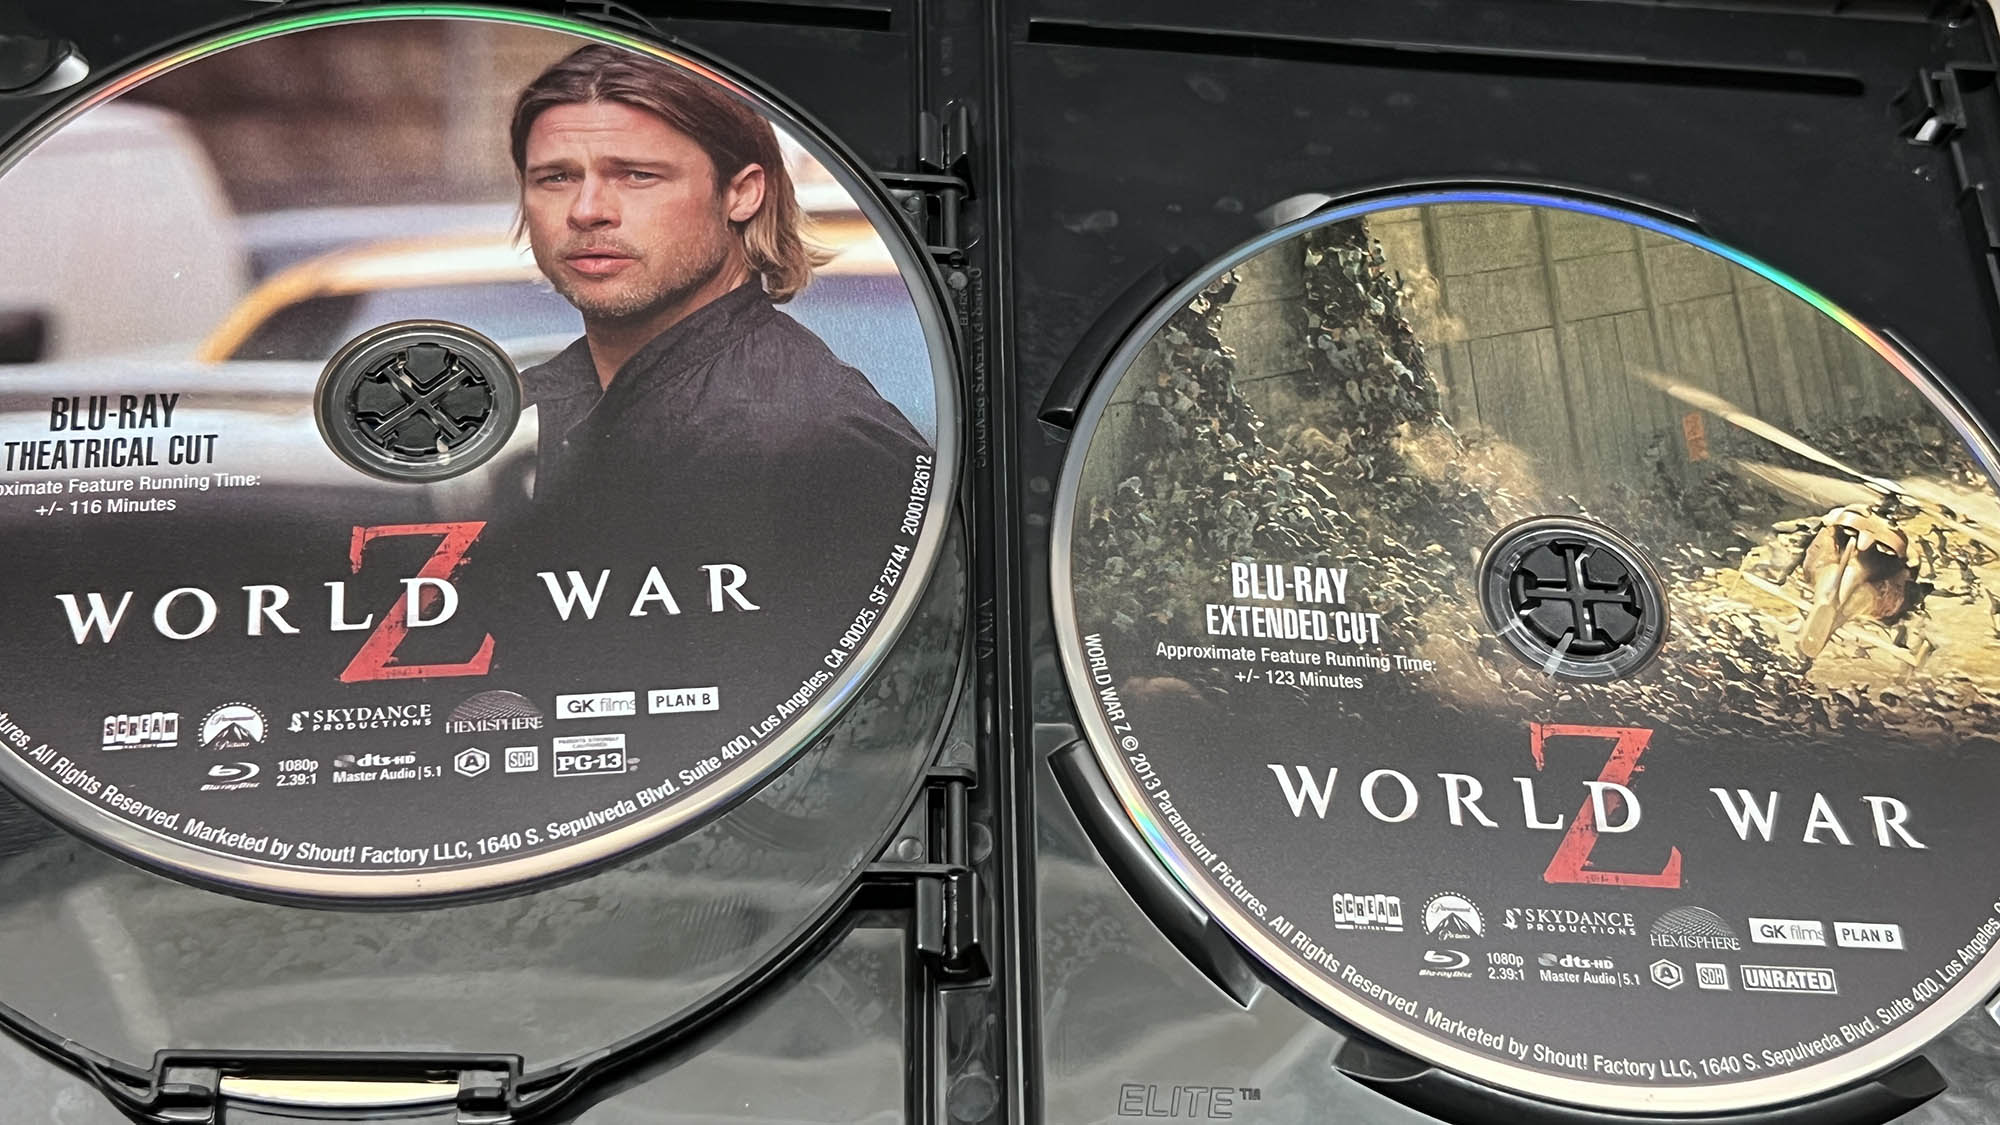 World War Z the two included Blu-rays